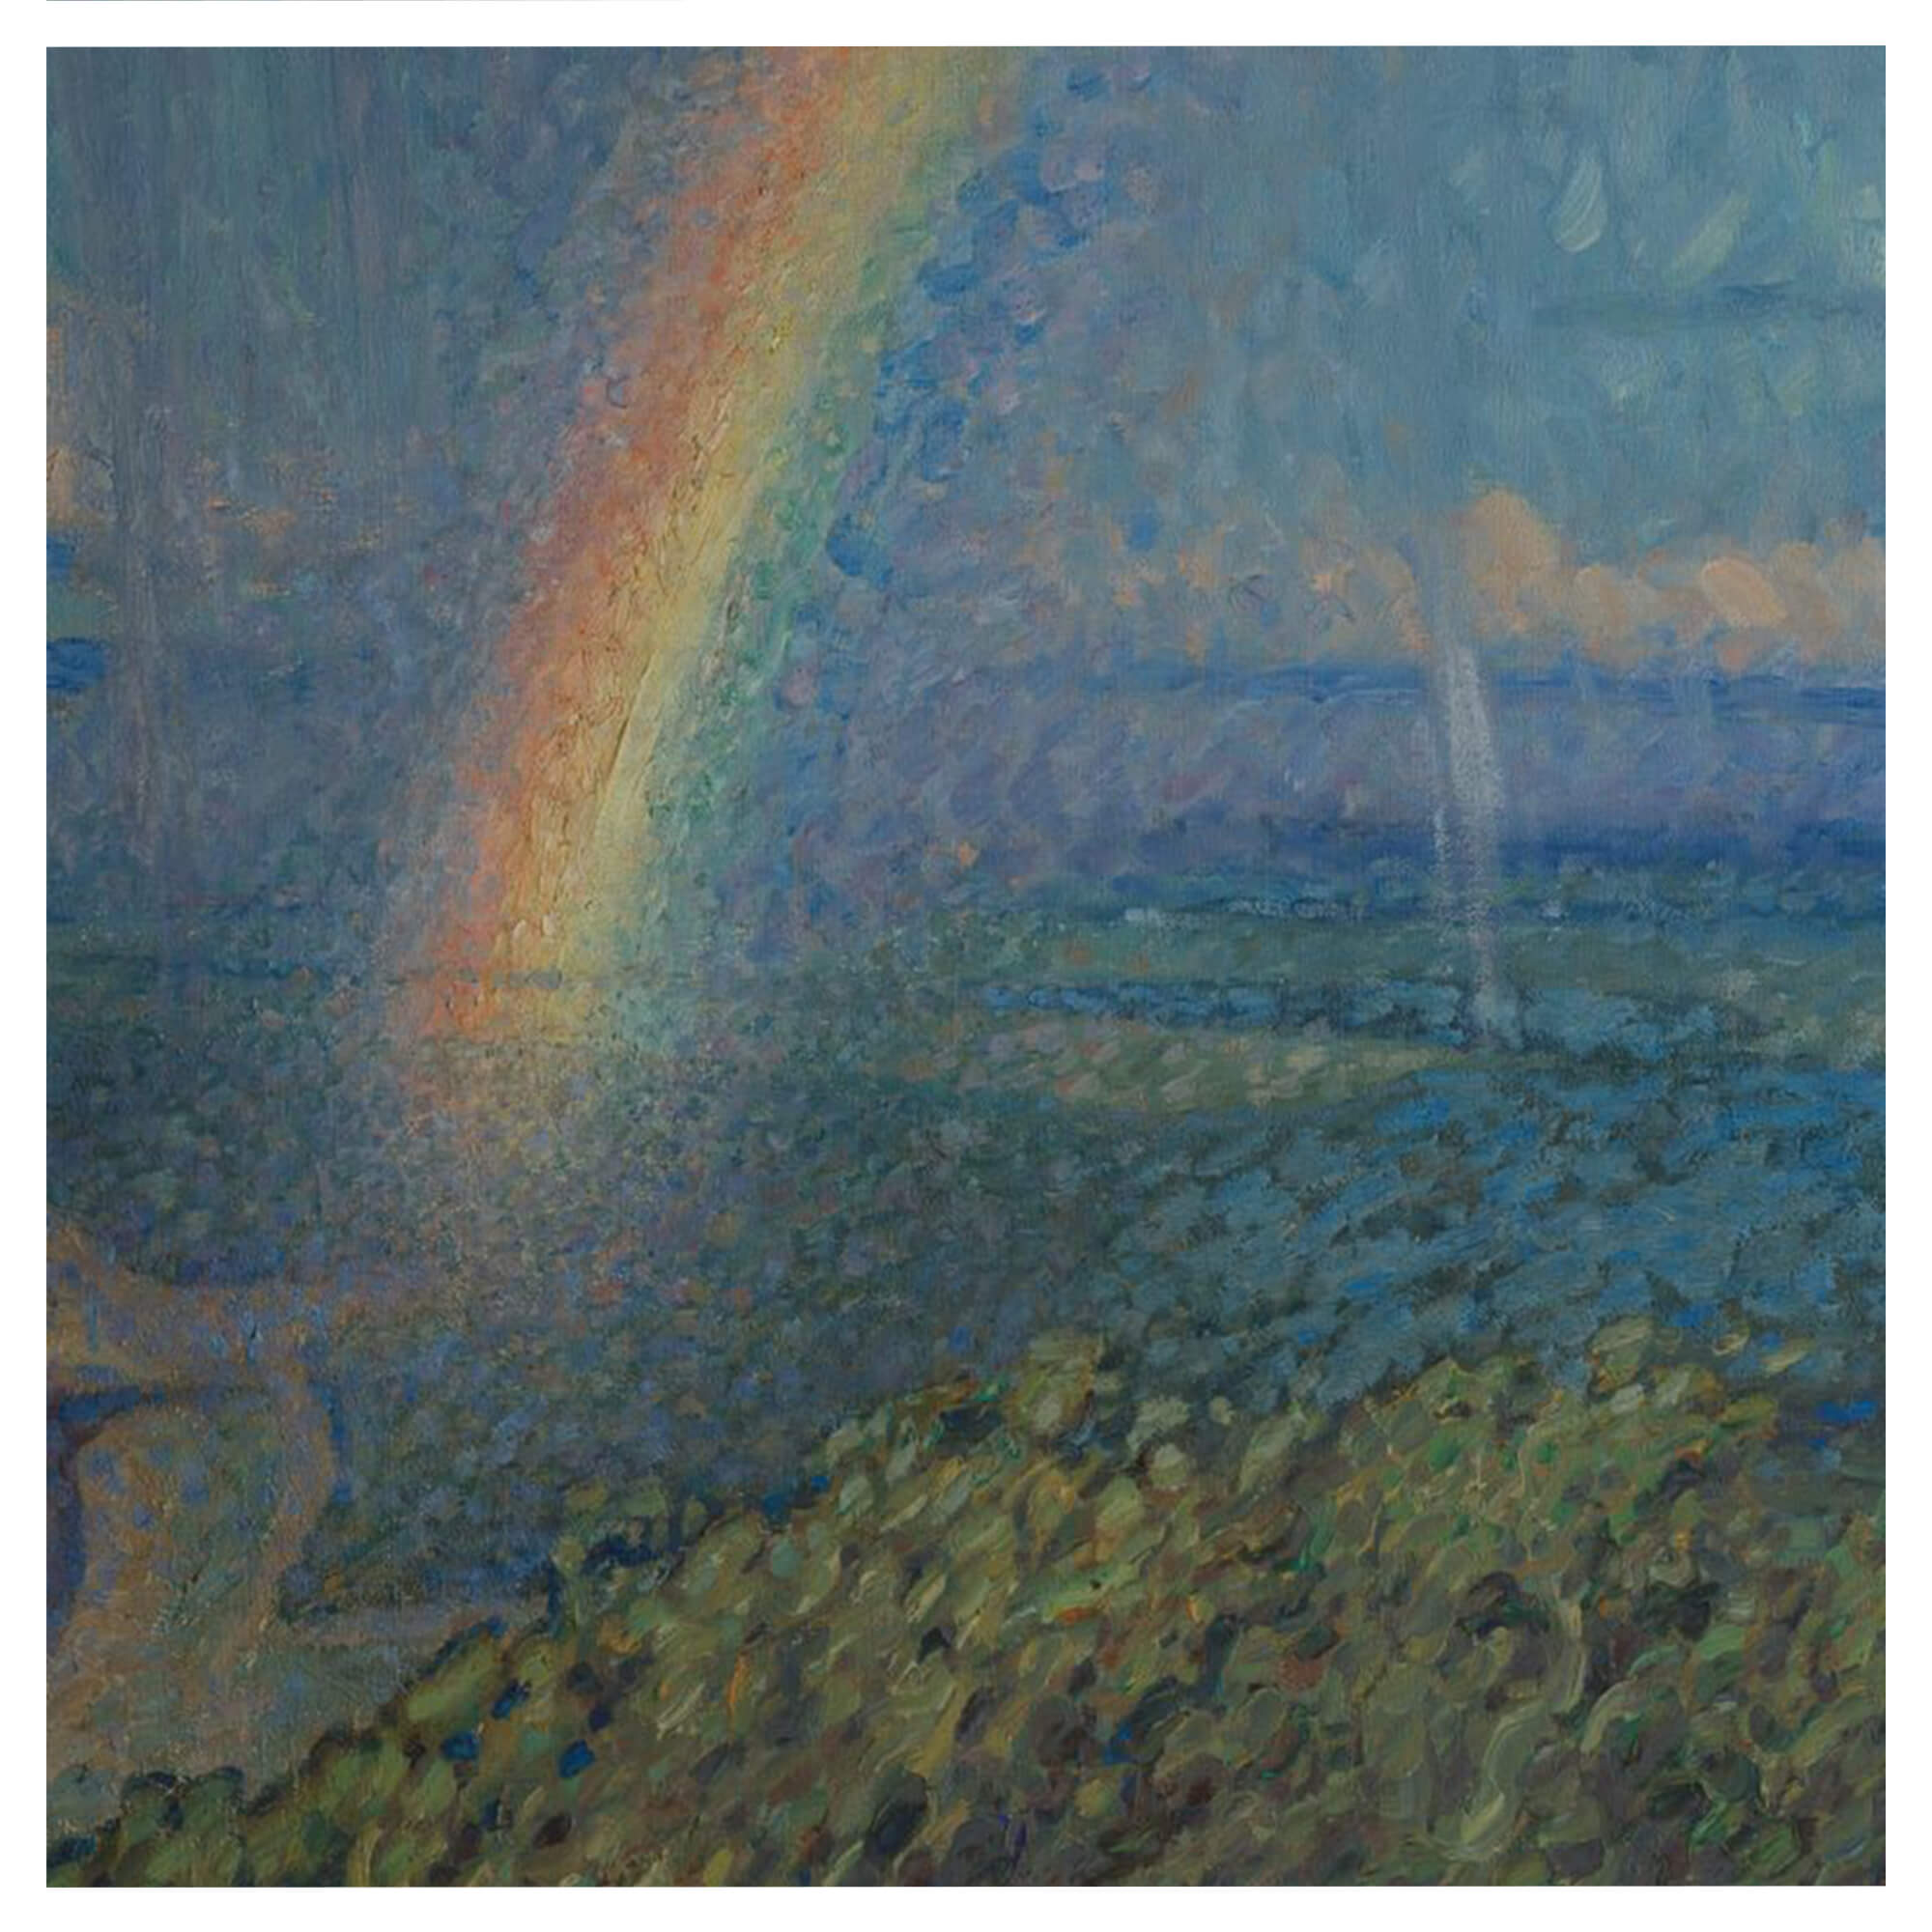 A rainbow in a landscape with distant ocean view